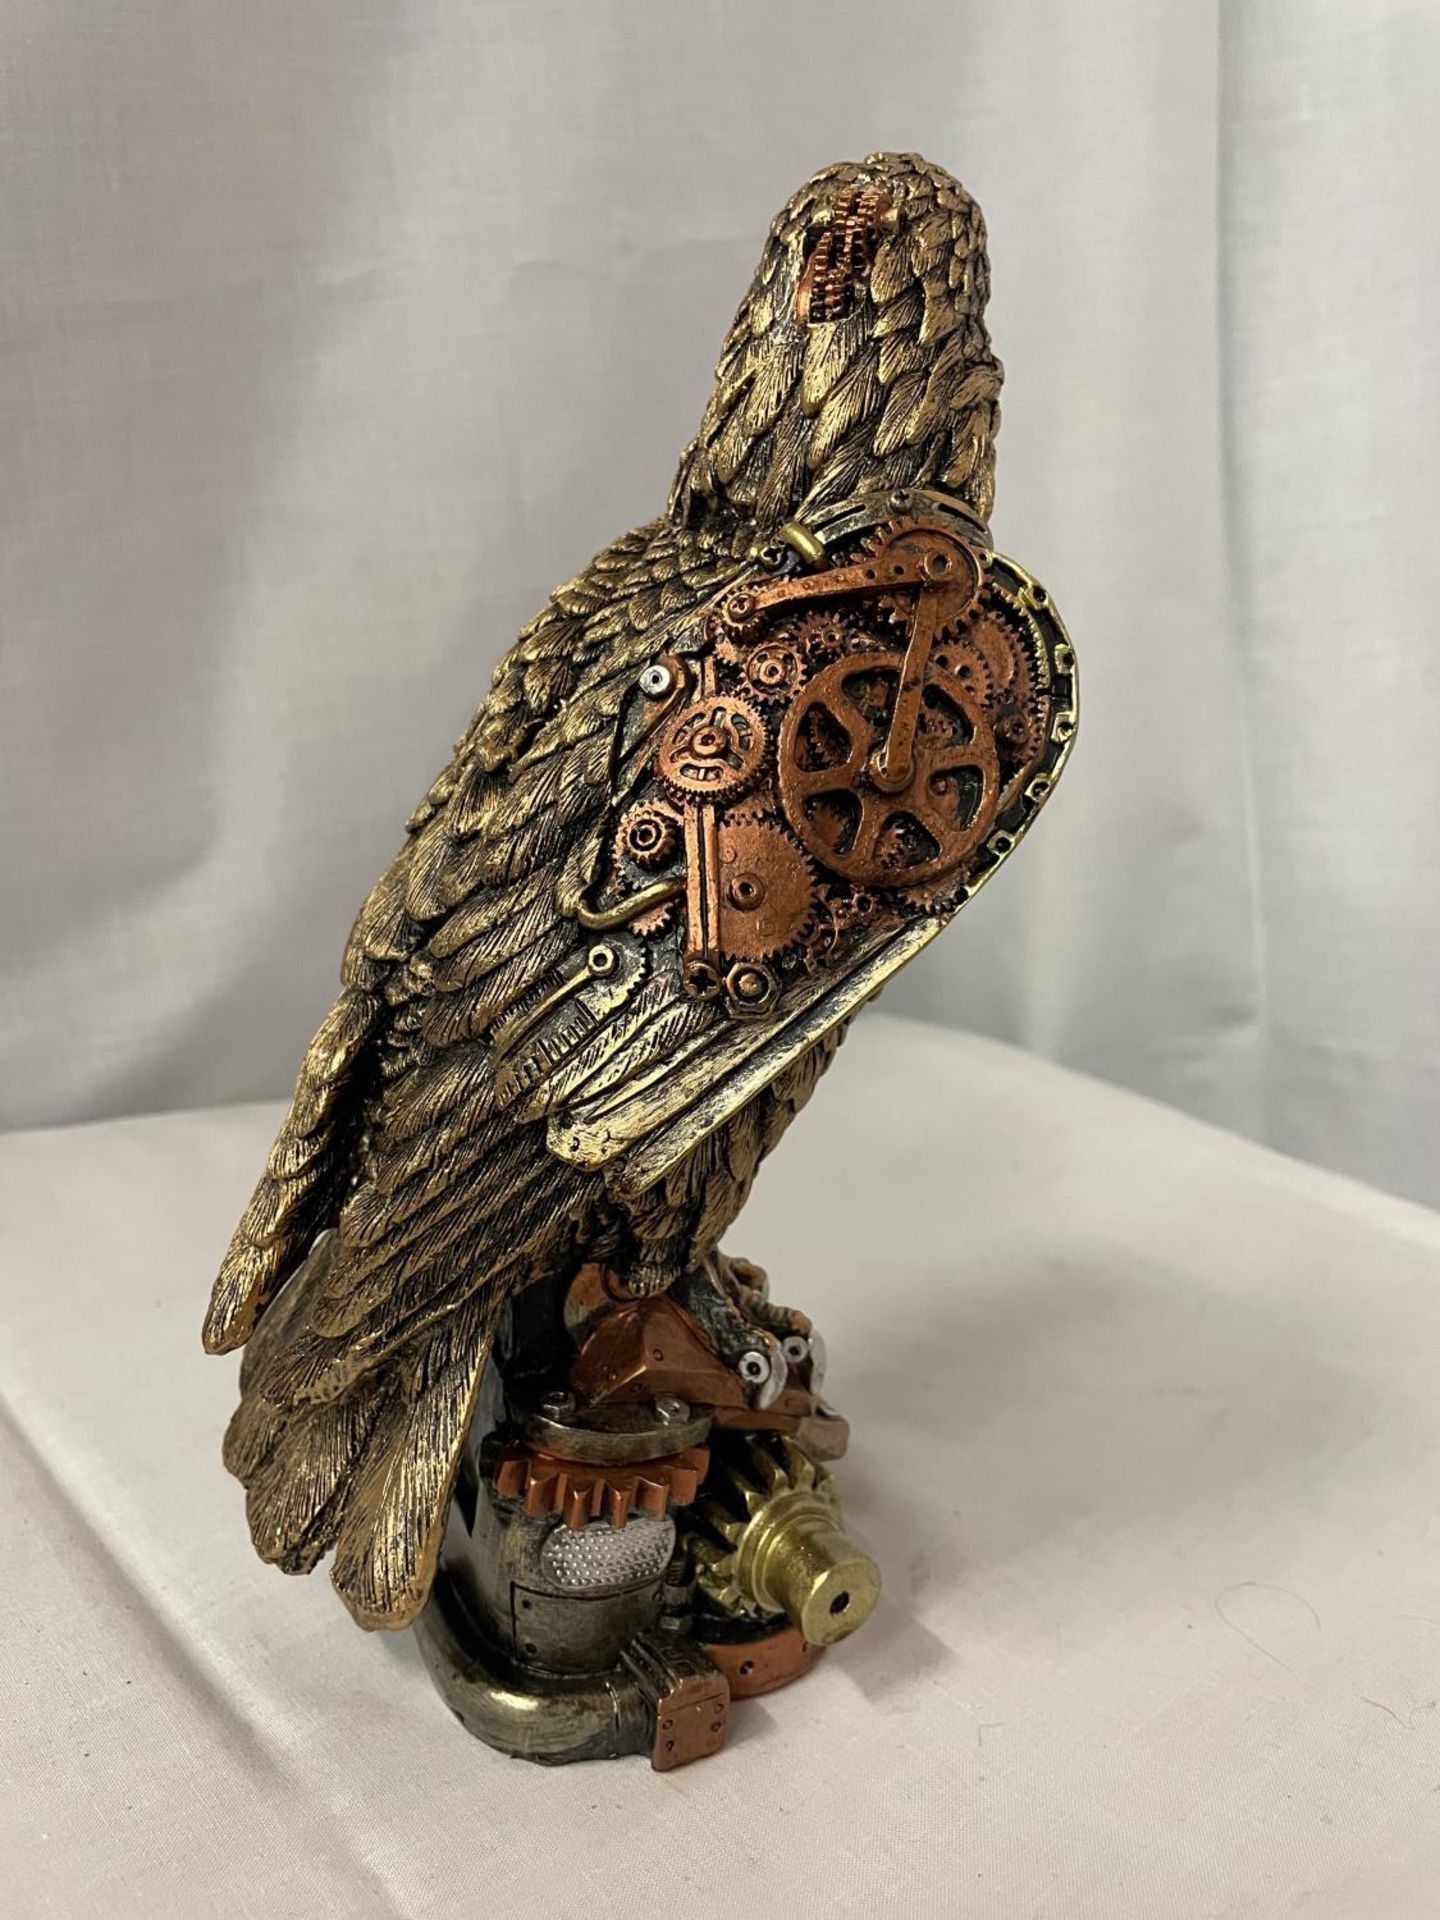 A STEAMPUNK STYLE EAGLE - Image 3 of 3